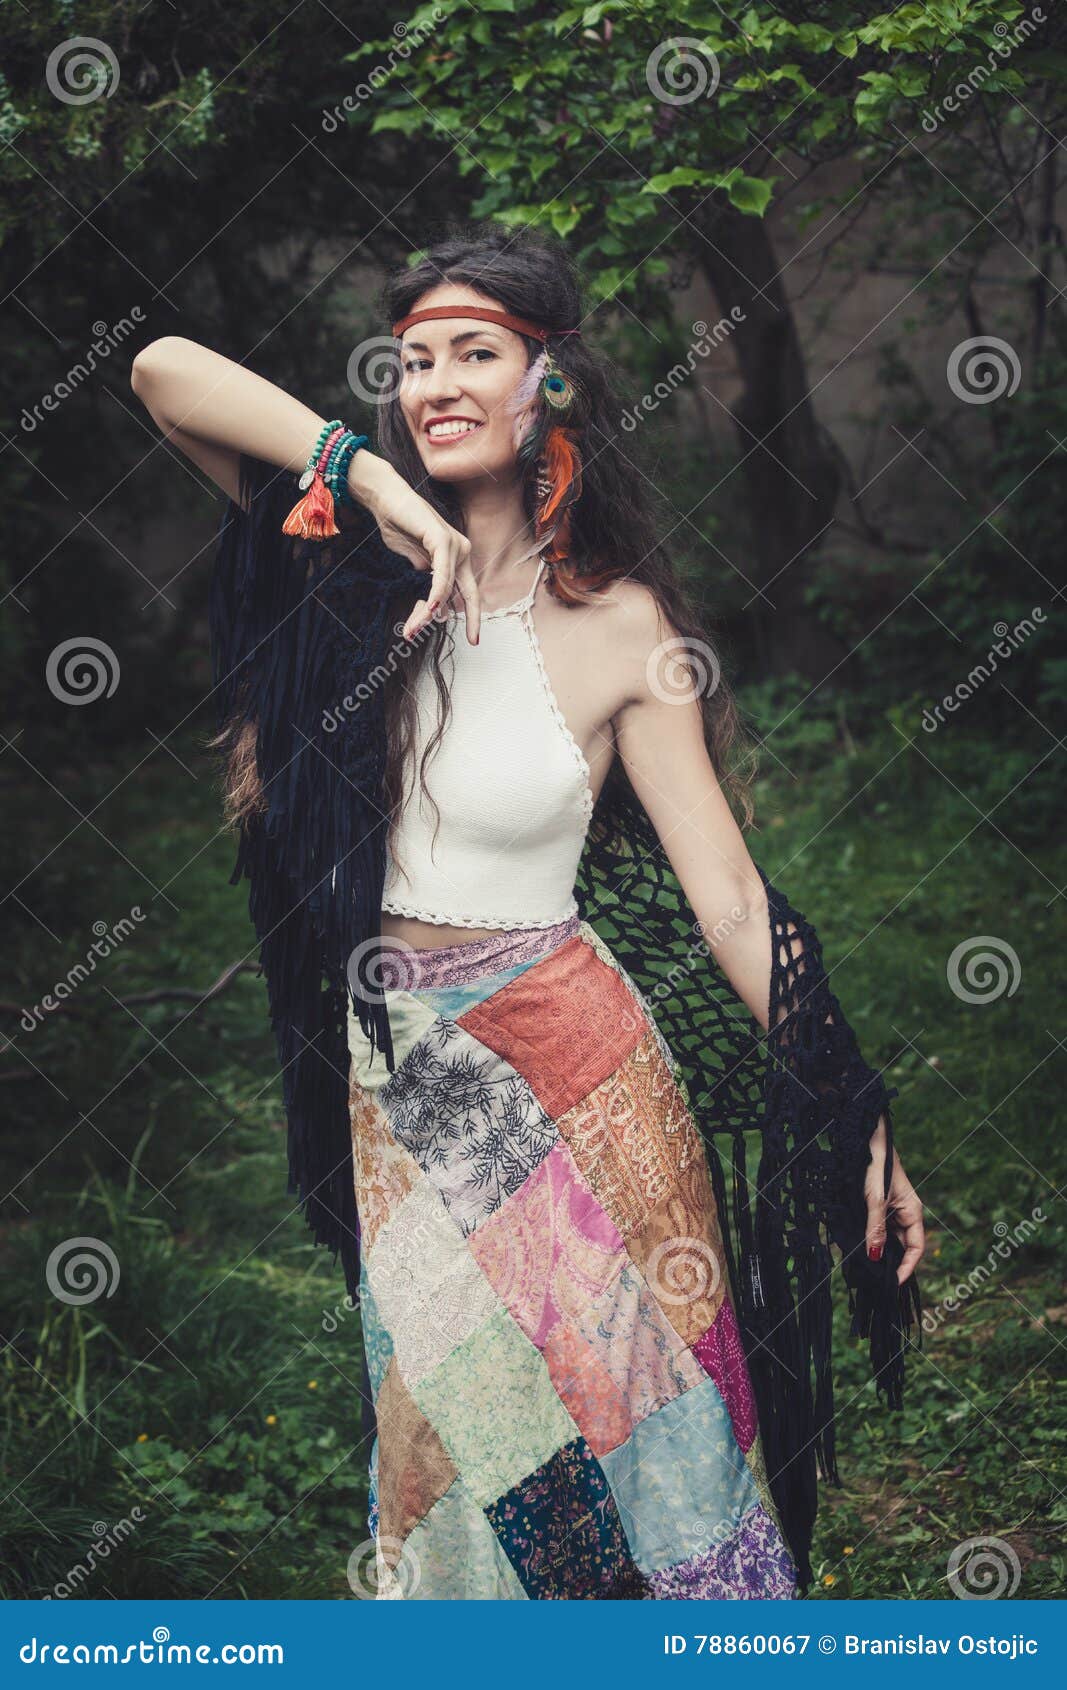 Young Happy Boho Style Girl Stock Image - Image of outdoor, summer ...